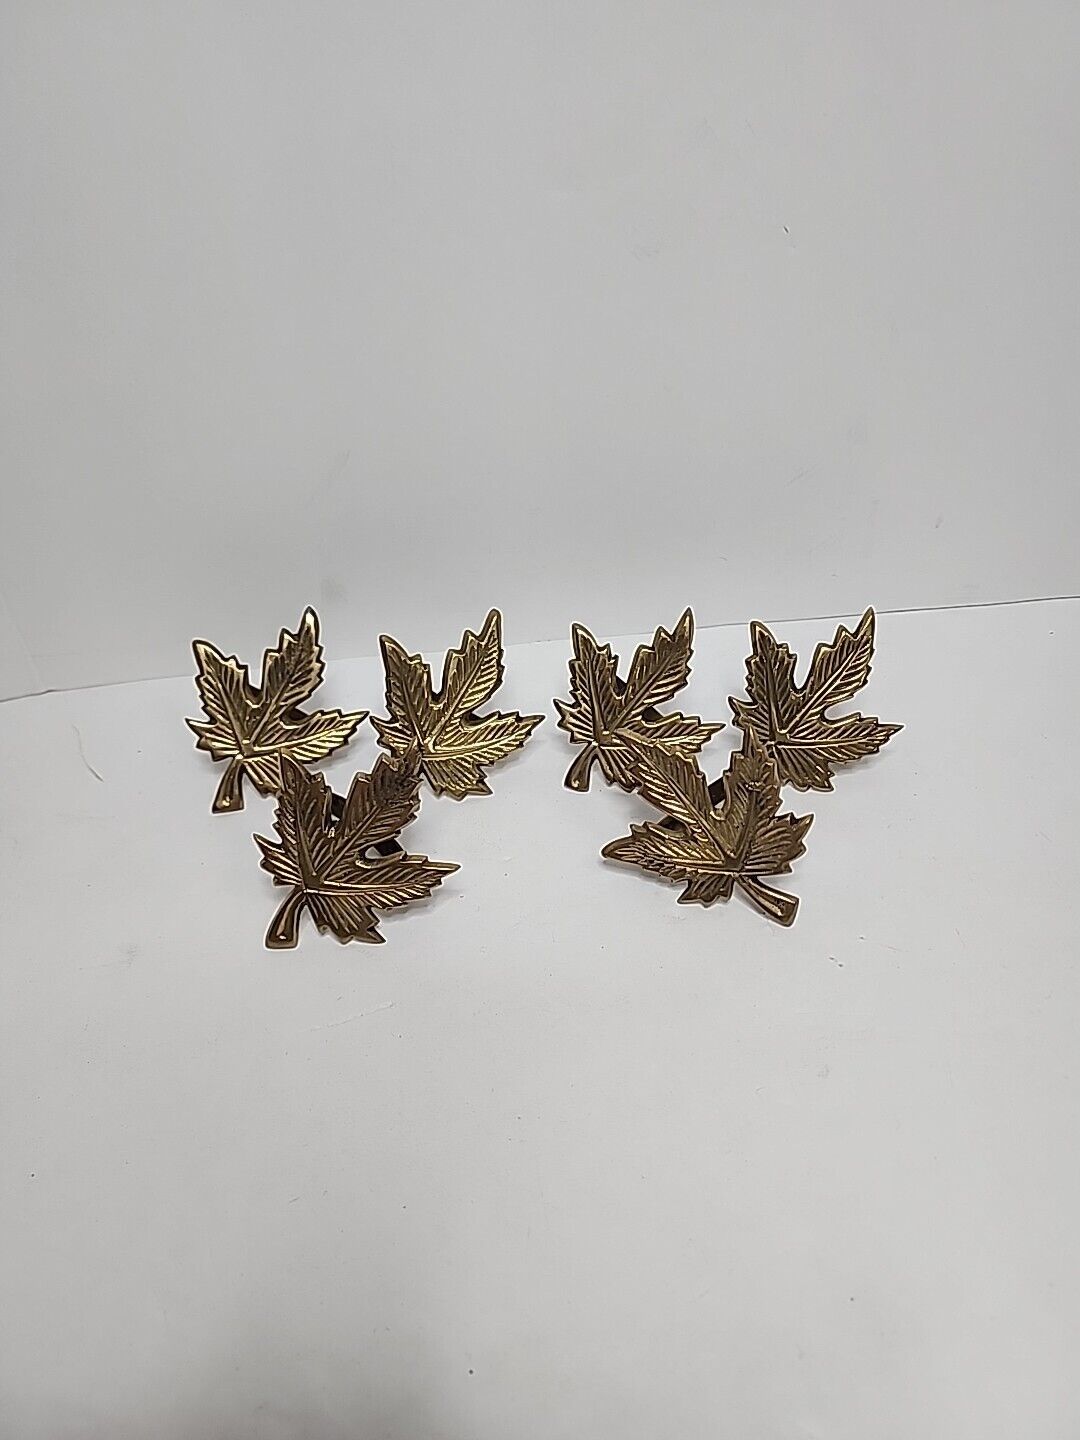 Collectible Set of 6 Solid Brass Leaf/Leaves Shaped Napkin Rings - Made in India